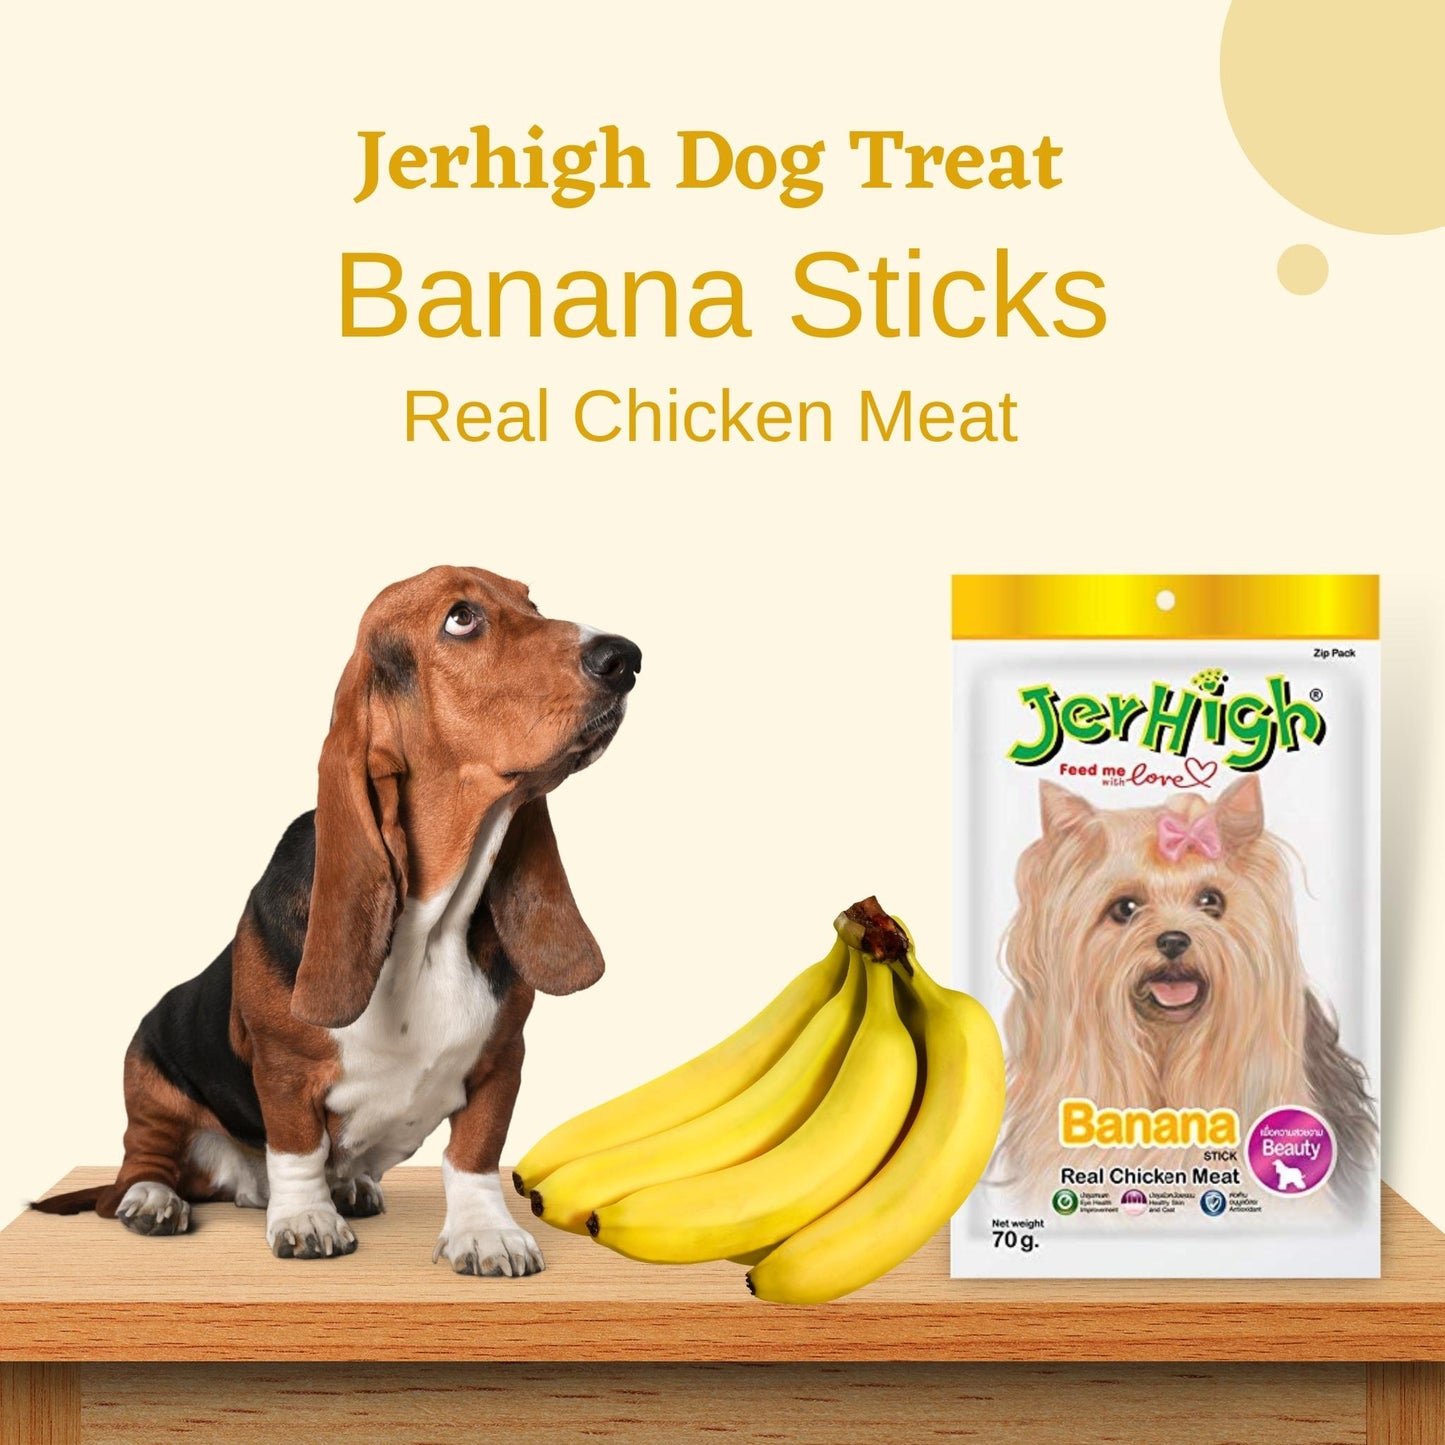 JerHigh Banana Stick Dog Treat with Real Chicken Meat - 70g, Pack of 2